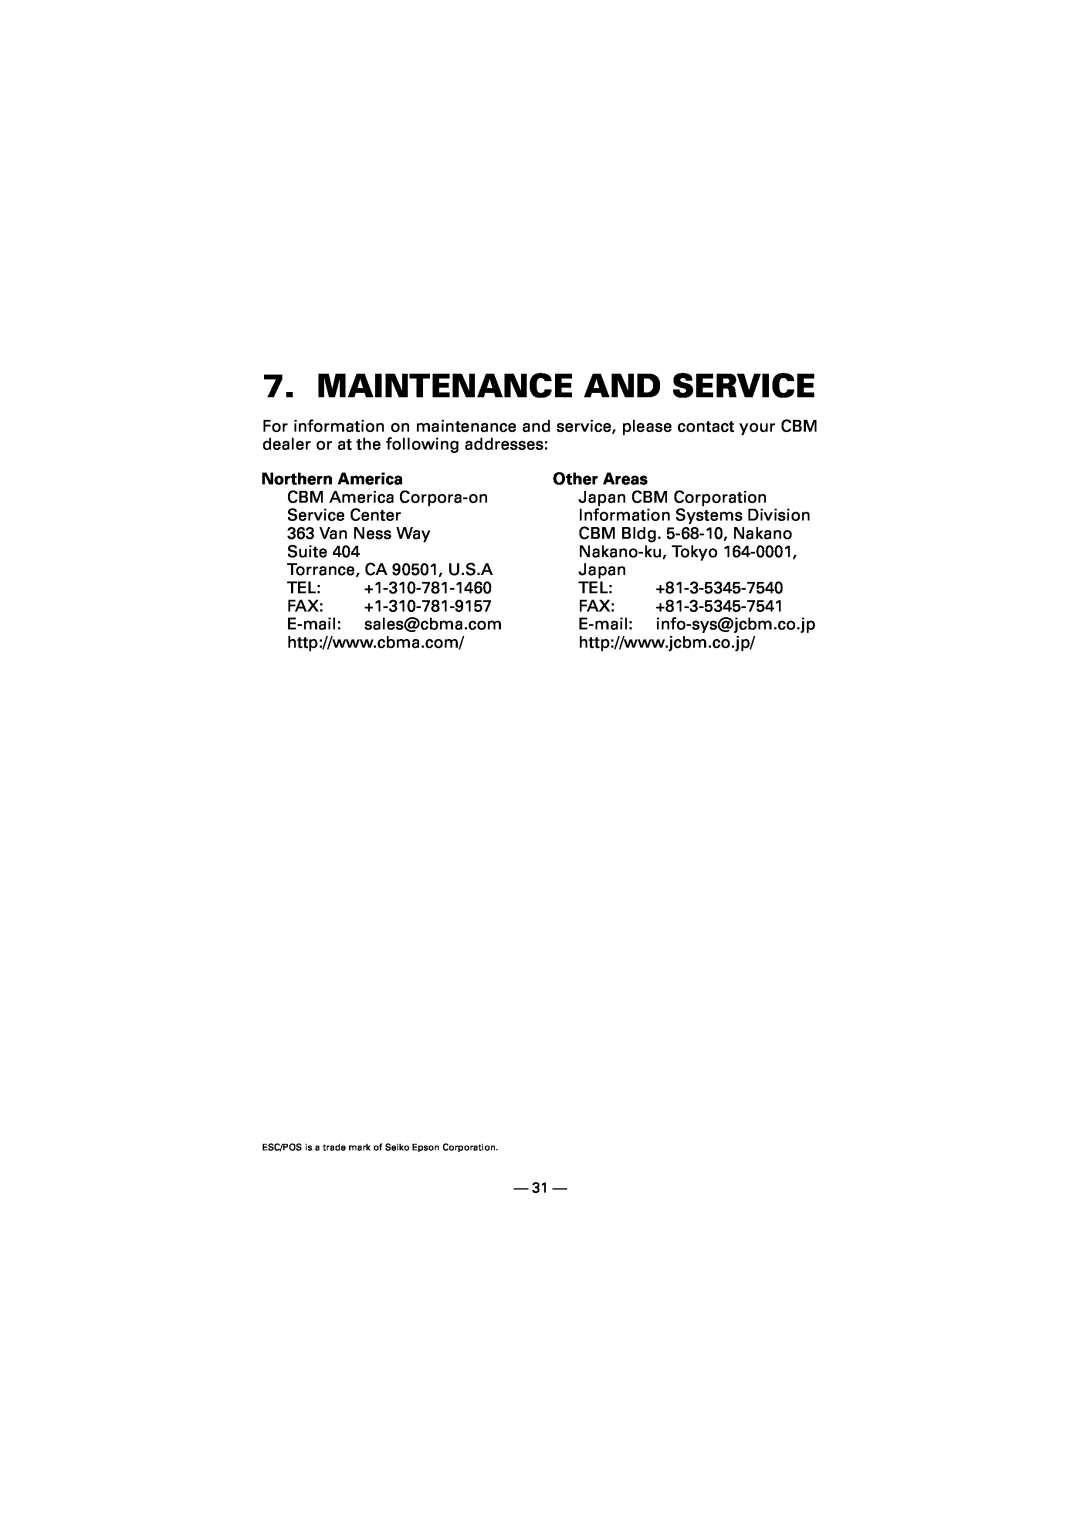 Citizen Systems CMP-10 manual Maintenance And Service, Northern America, Other Areas 